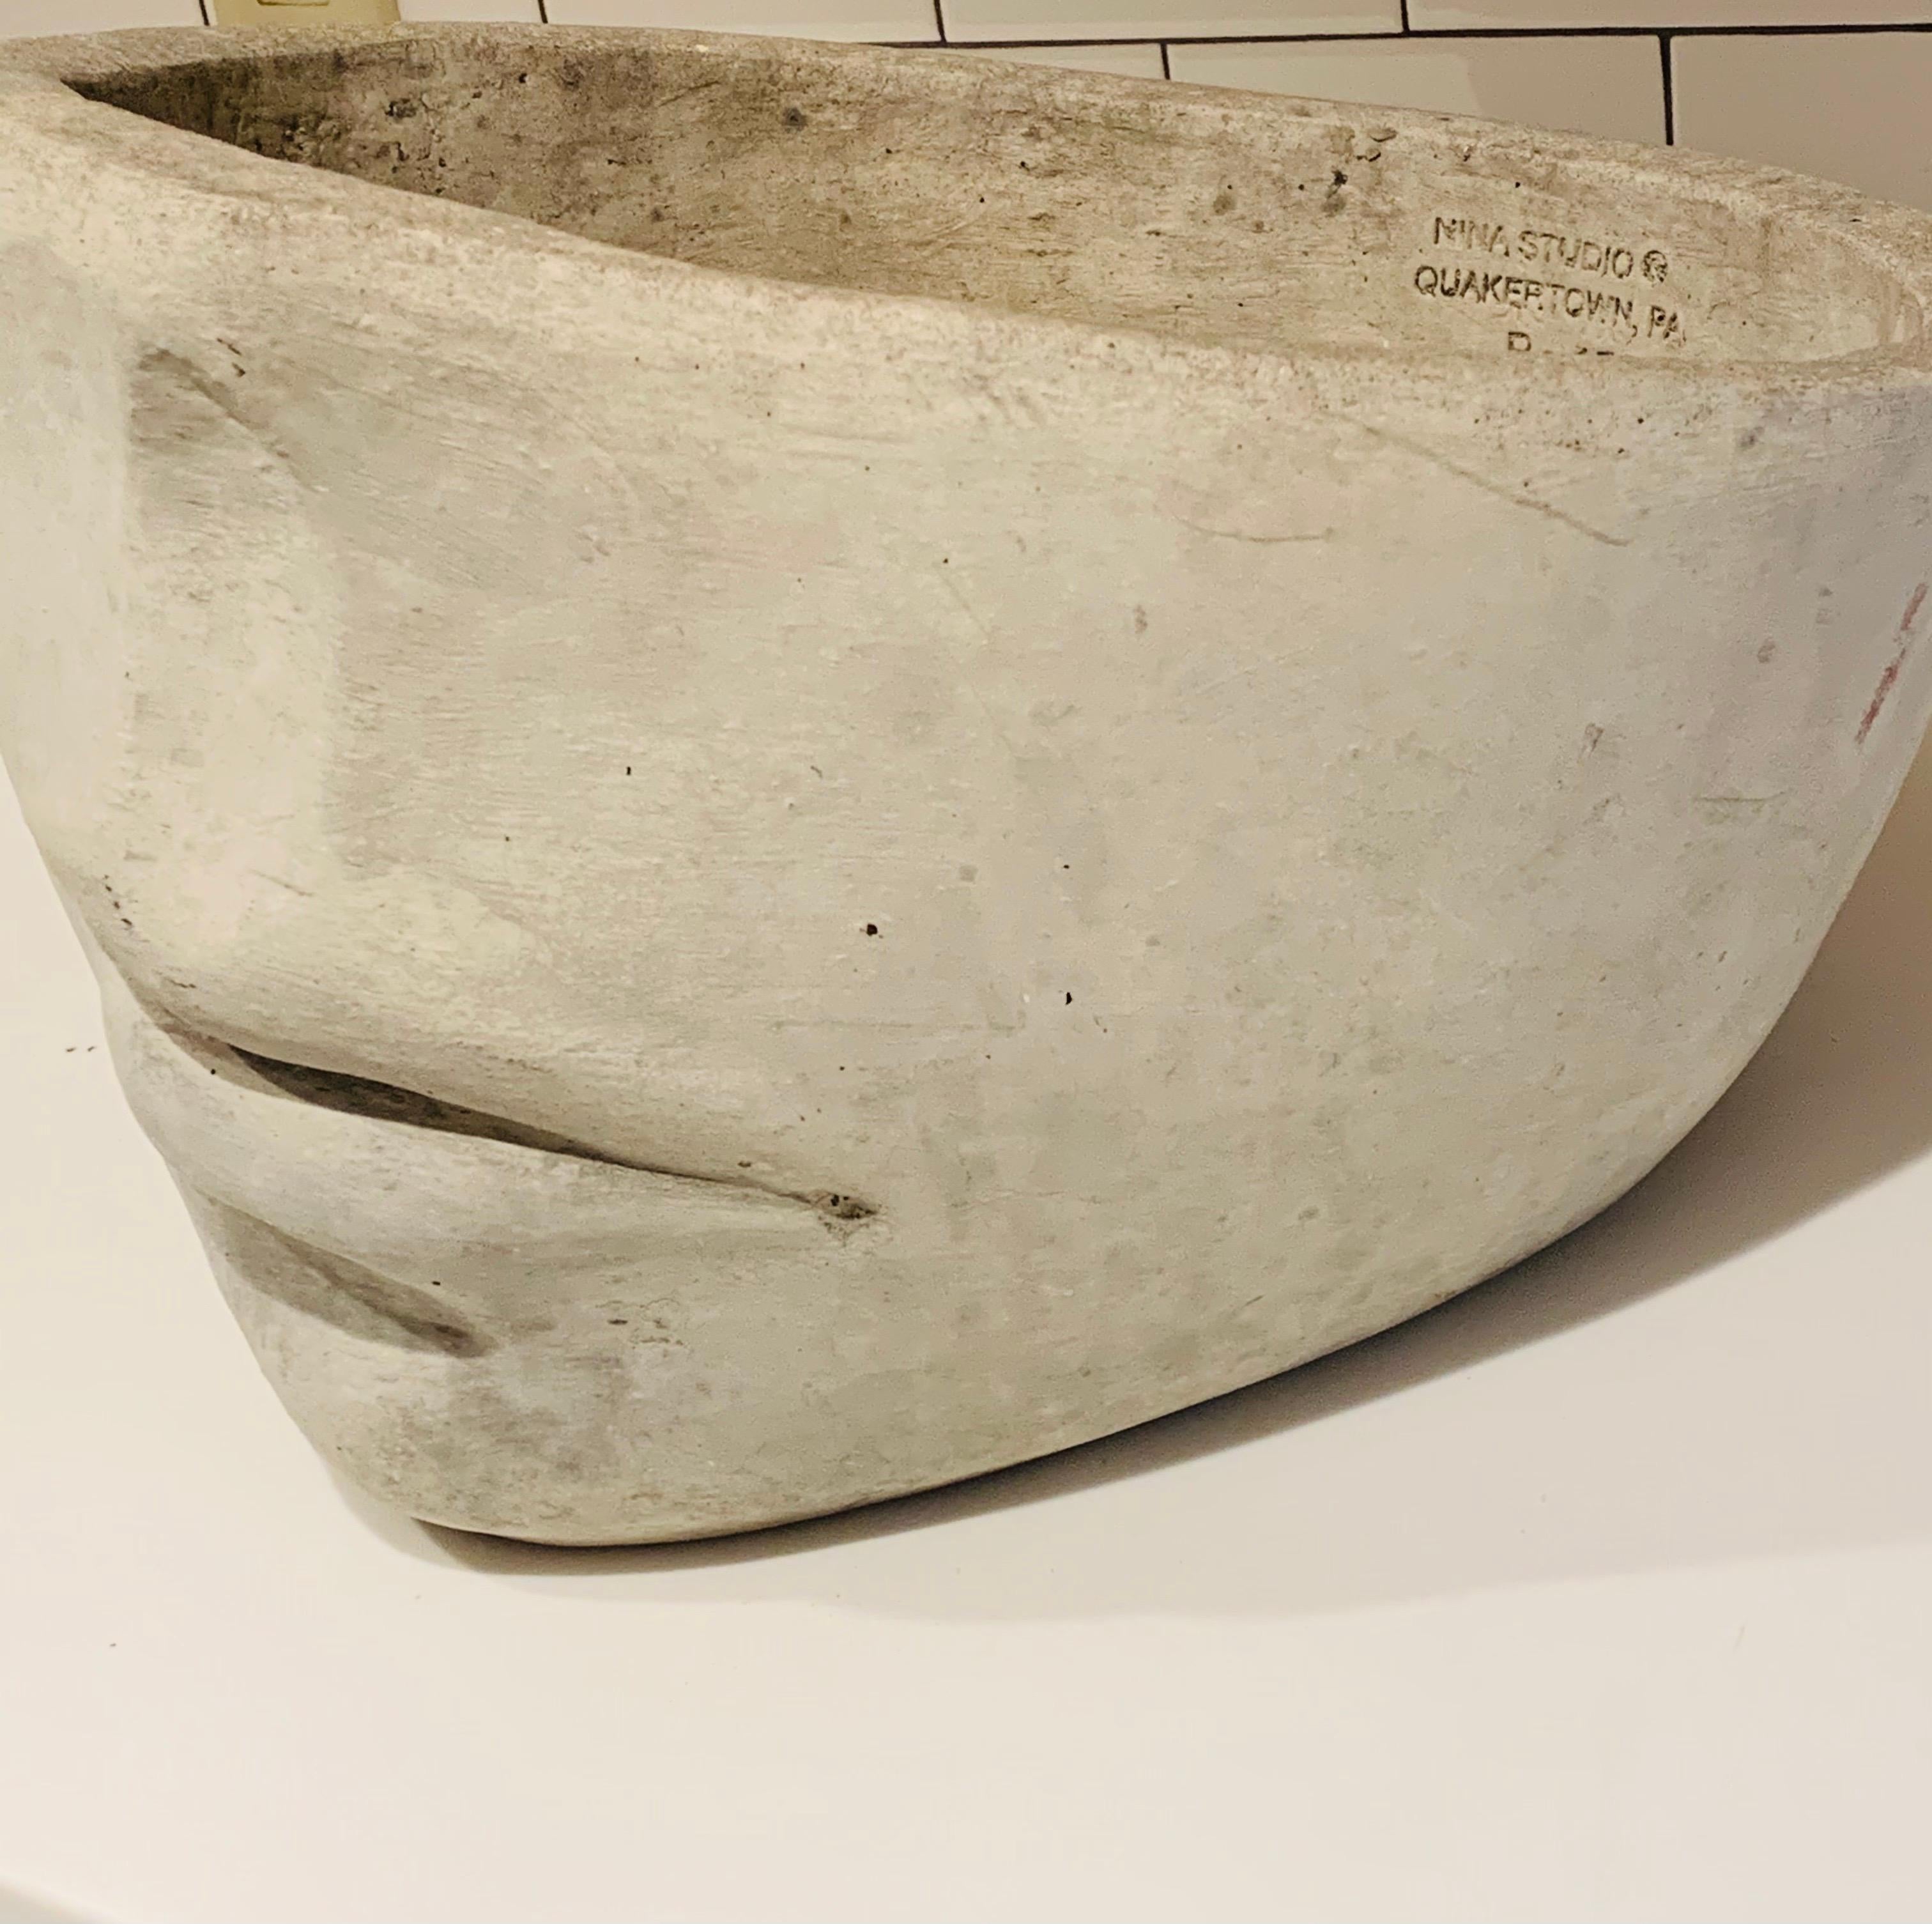 This cast-concrete vessel was designed & produced in the 1970's by Nina Studios in Quakertown, Pa.

There have been many other half-faced planters made, but the proportions never look quite right. 

Its rather scarce to find the original in this